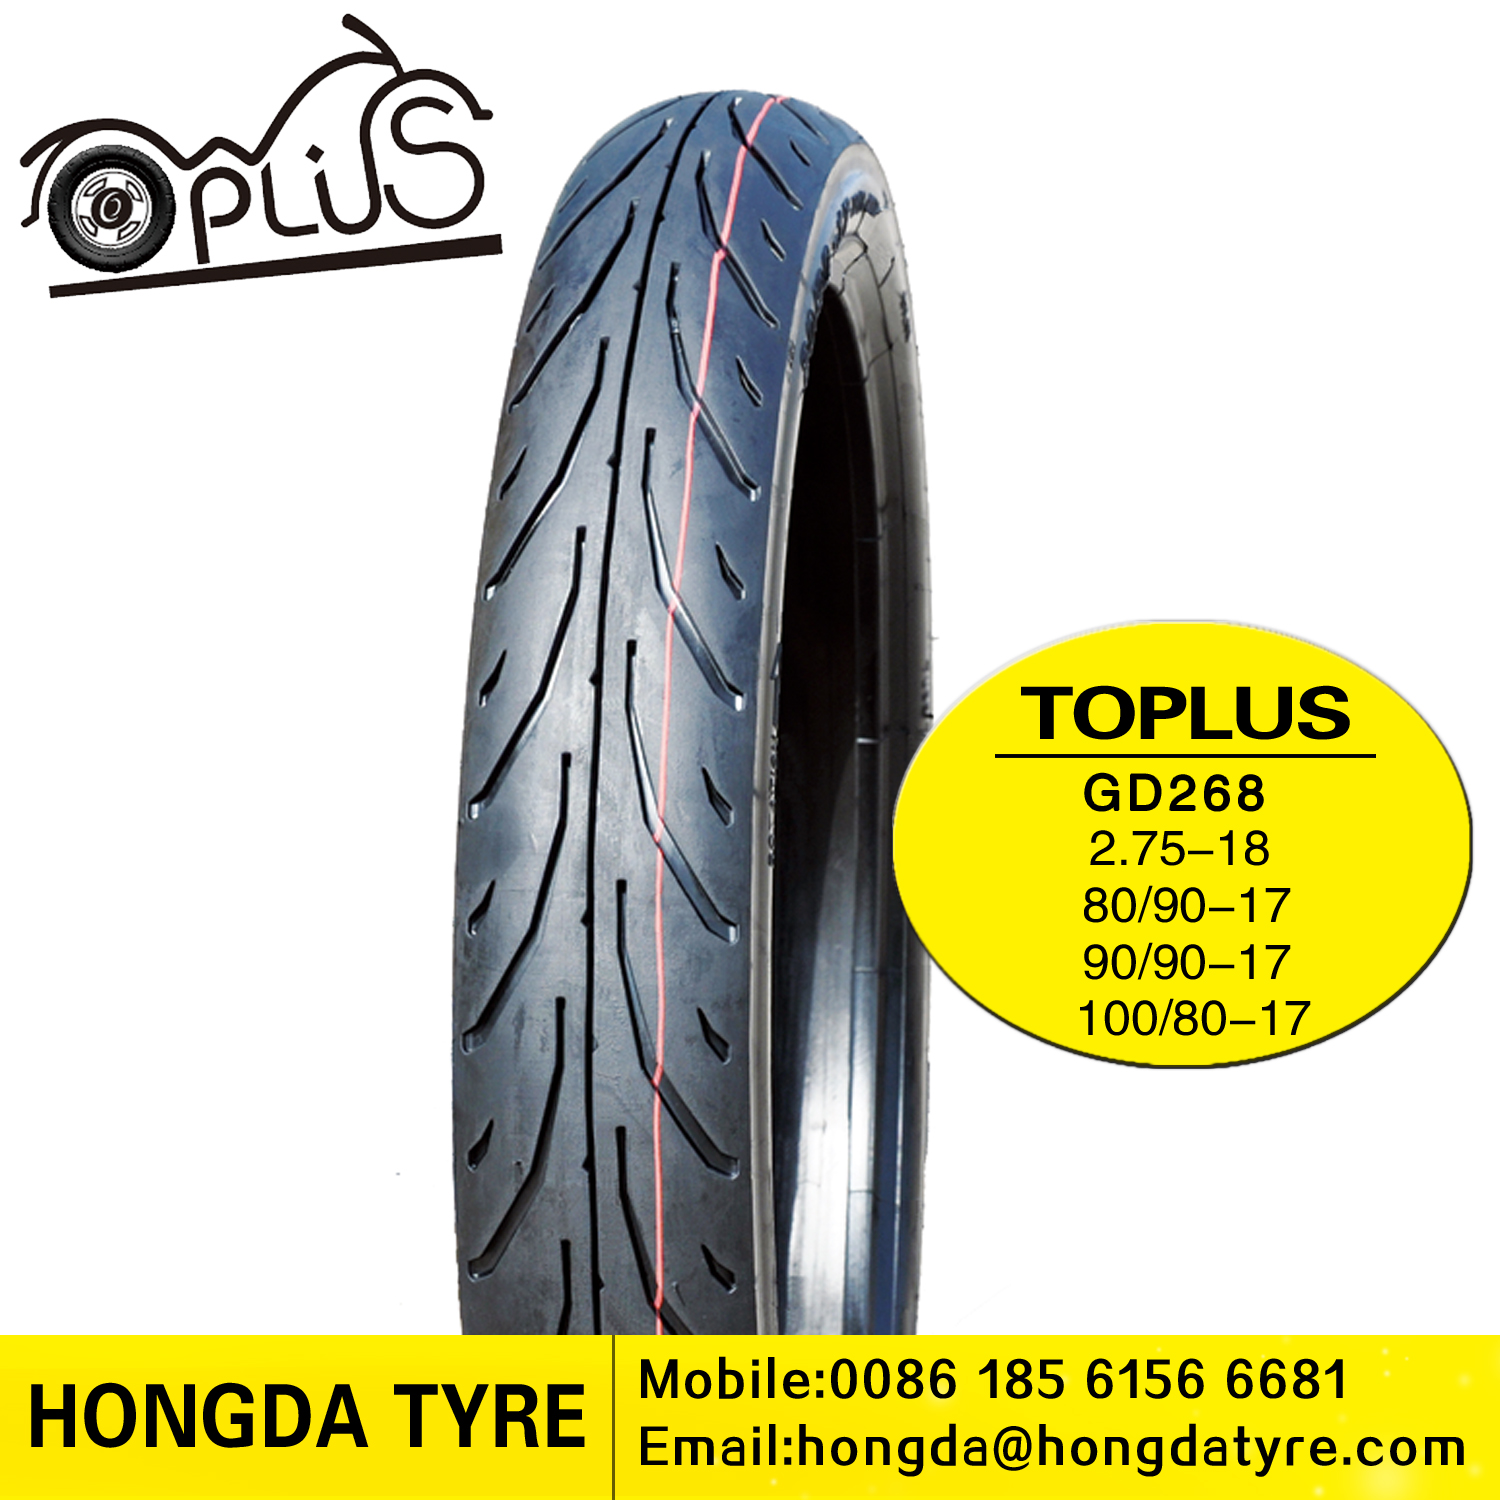 Motorcycle tyre GD268